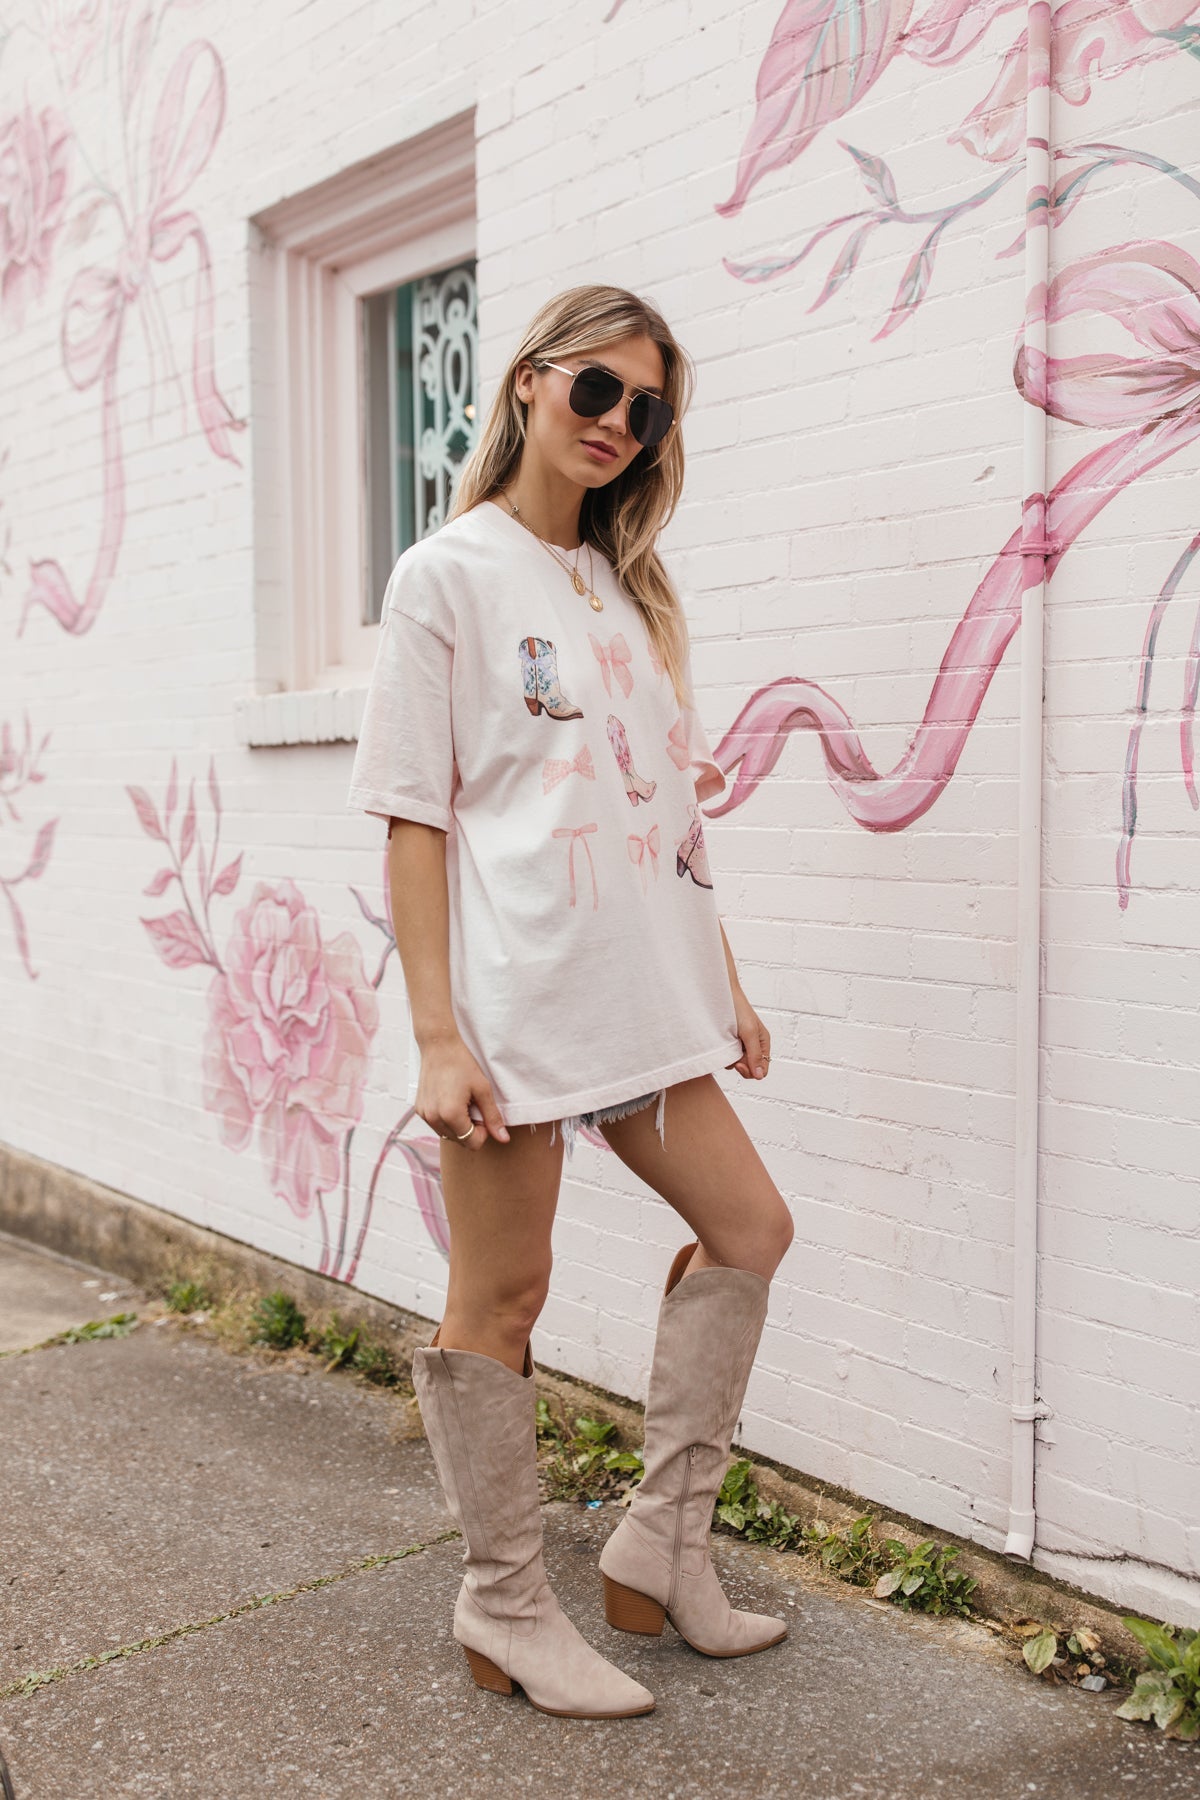 Boots & Bows Tee, alternate, color, Blush Pink